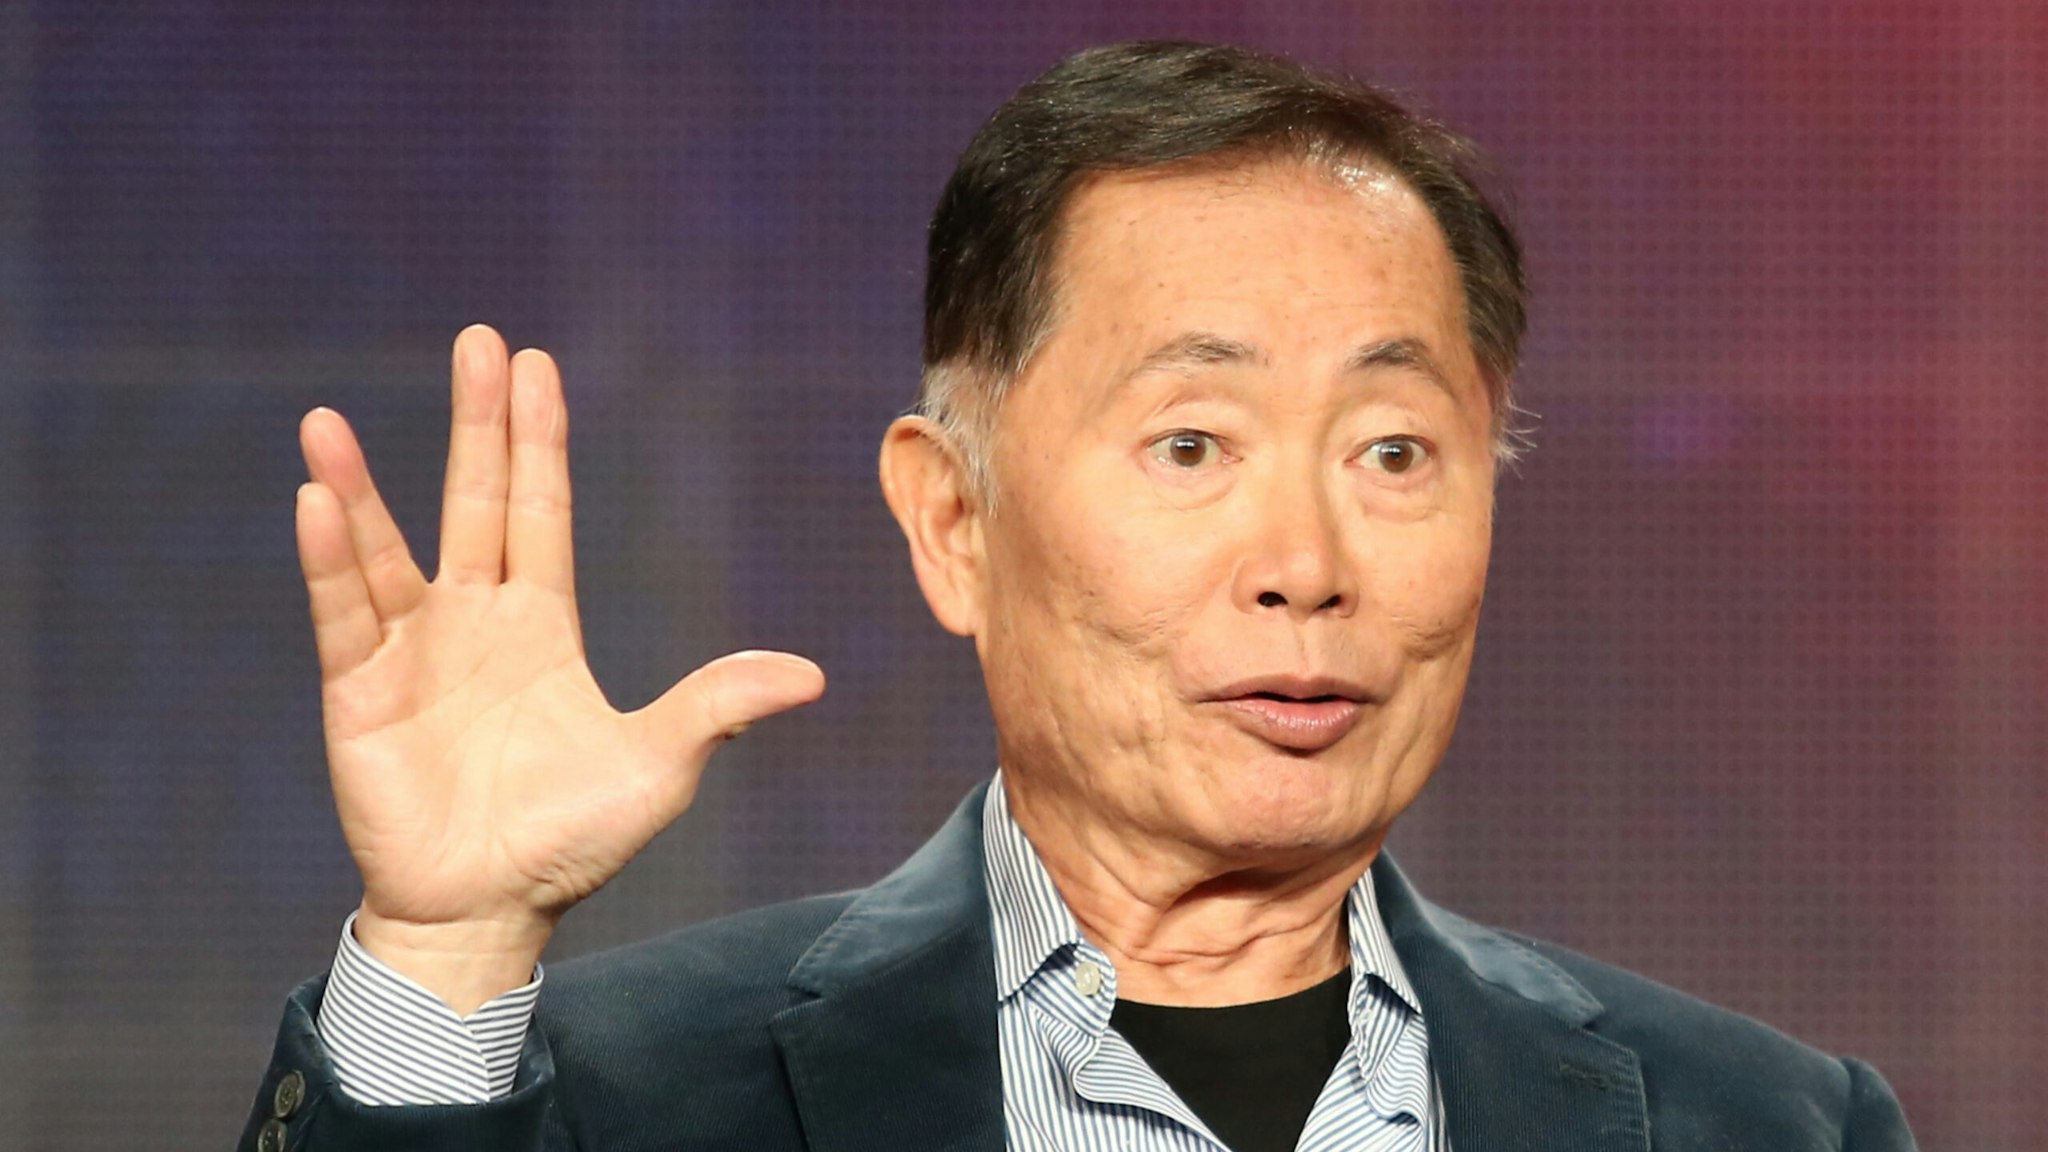 Actor George Takei speaks onstage during the 'Pioneers of Television, Season 4, "Acting Funny", "Breaking Barriers", "Doctors and Nurses", and "Standup to Sitcom" ' panel discussion at the PBS portion of the 2014 Winter Television Critics Association tour at Langham Hotel on January 21, 2014 in Pasadena, California.